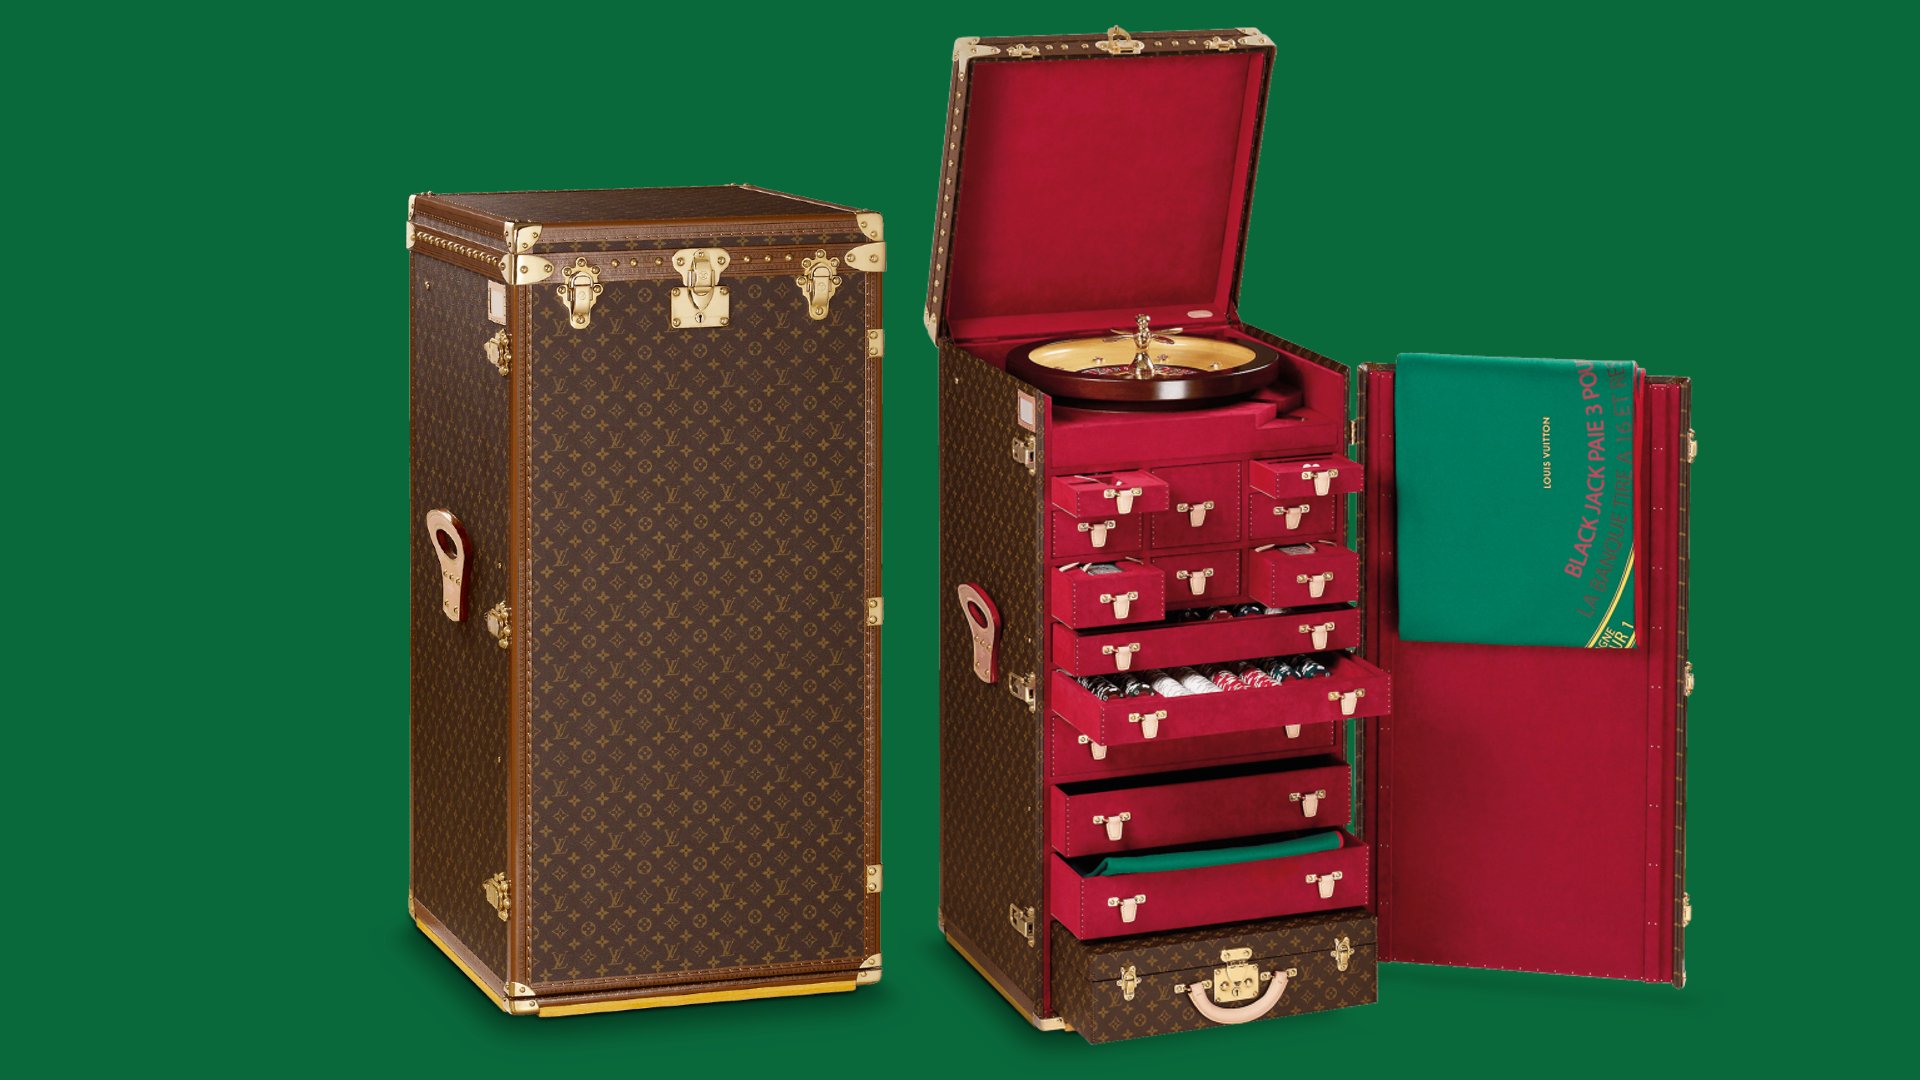 Unique Louis Vuitton Casino trunk. Containing Roulette, blackjack and  poker. #sold#specialorder, By Pinth Interiors & Objects